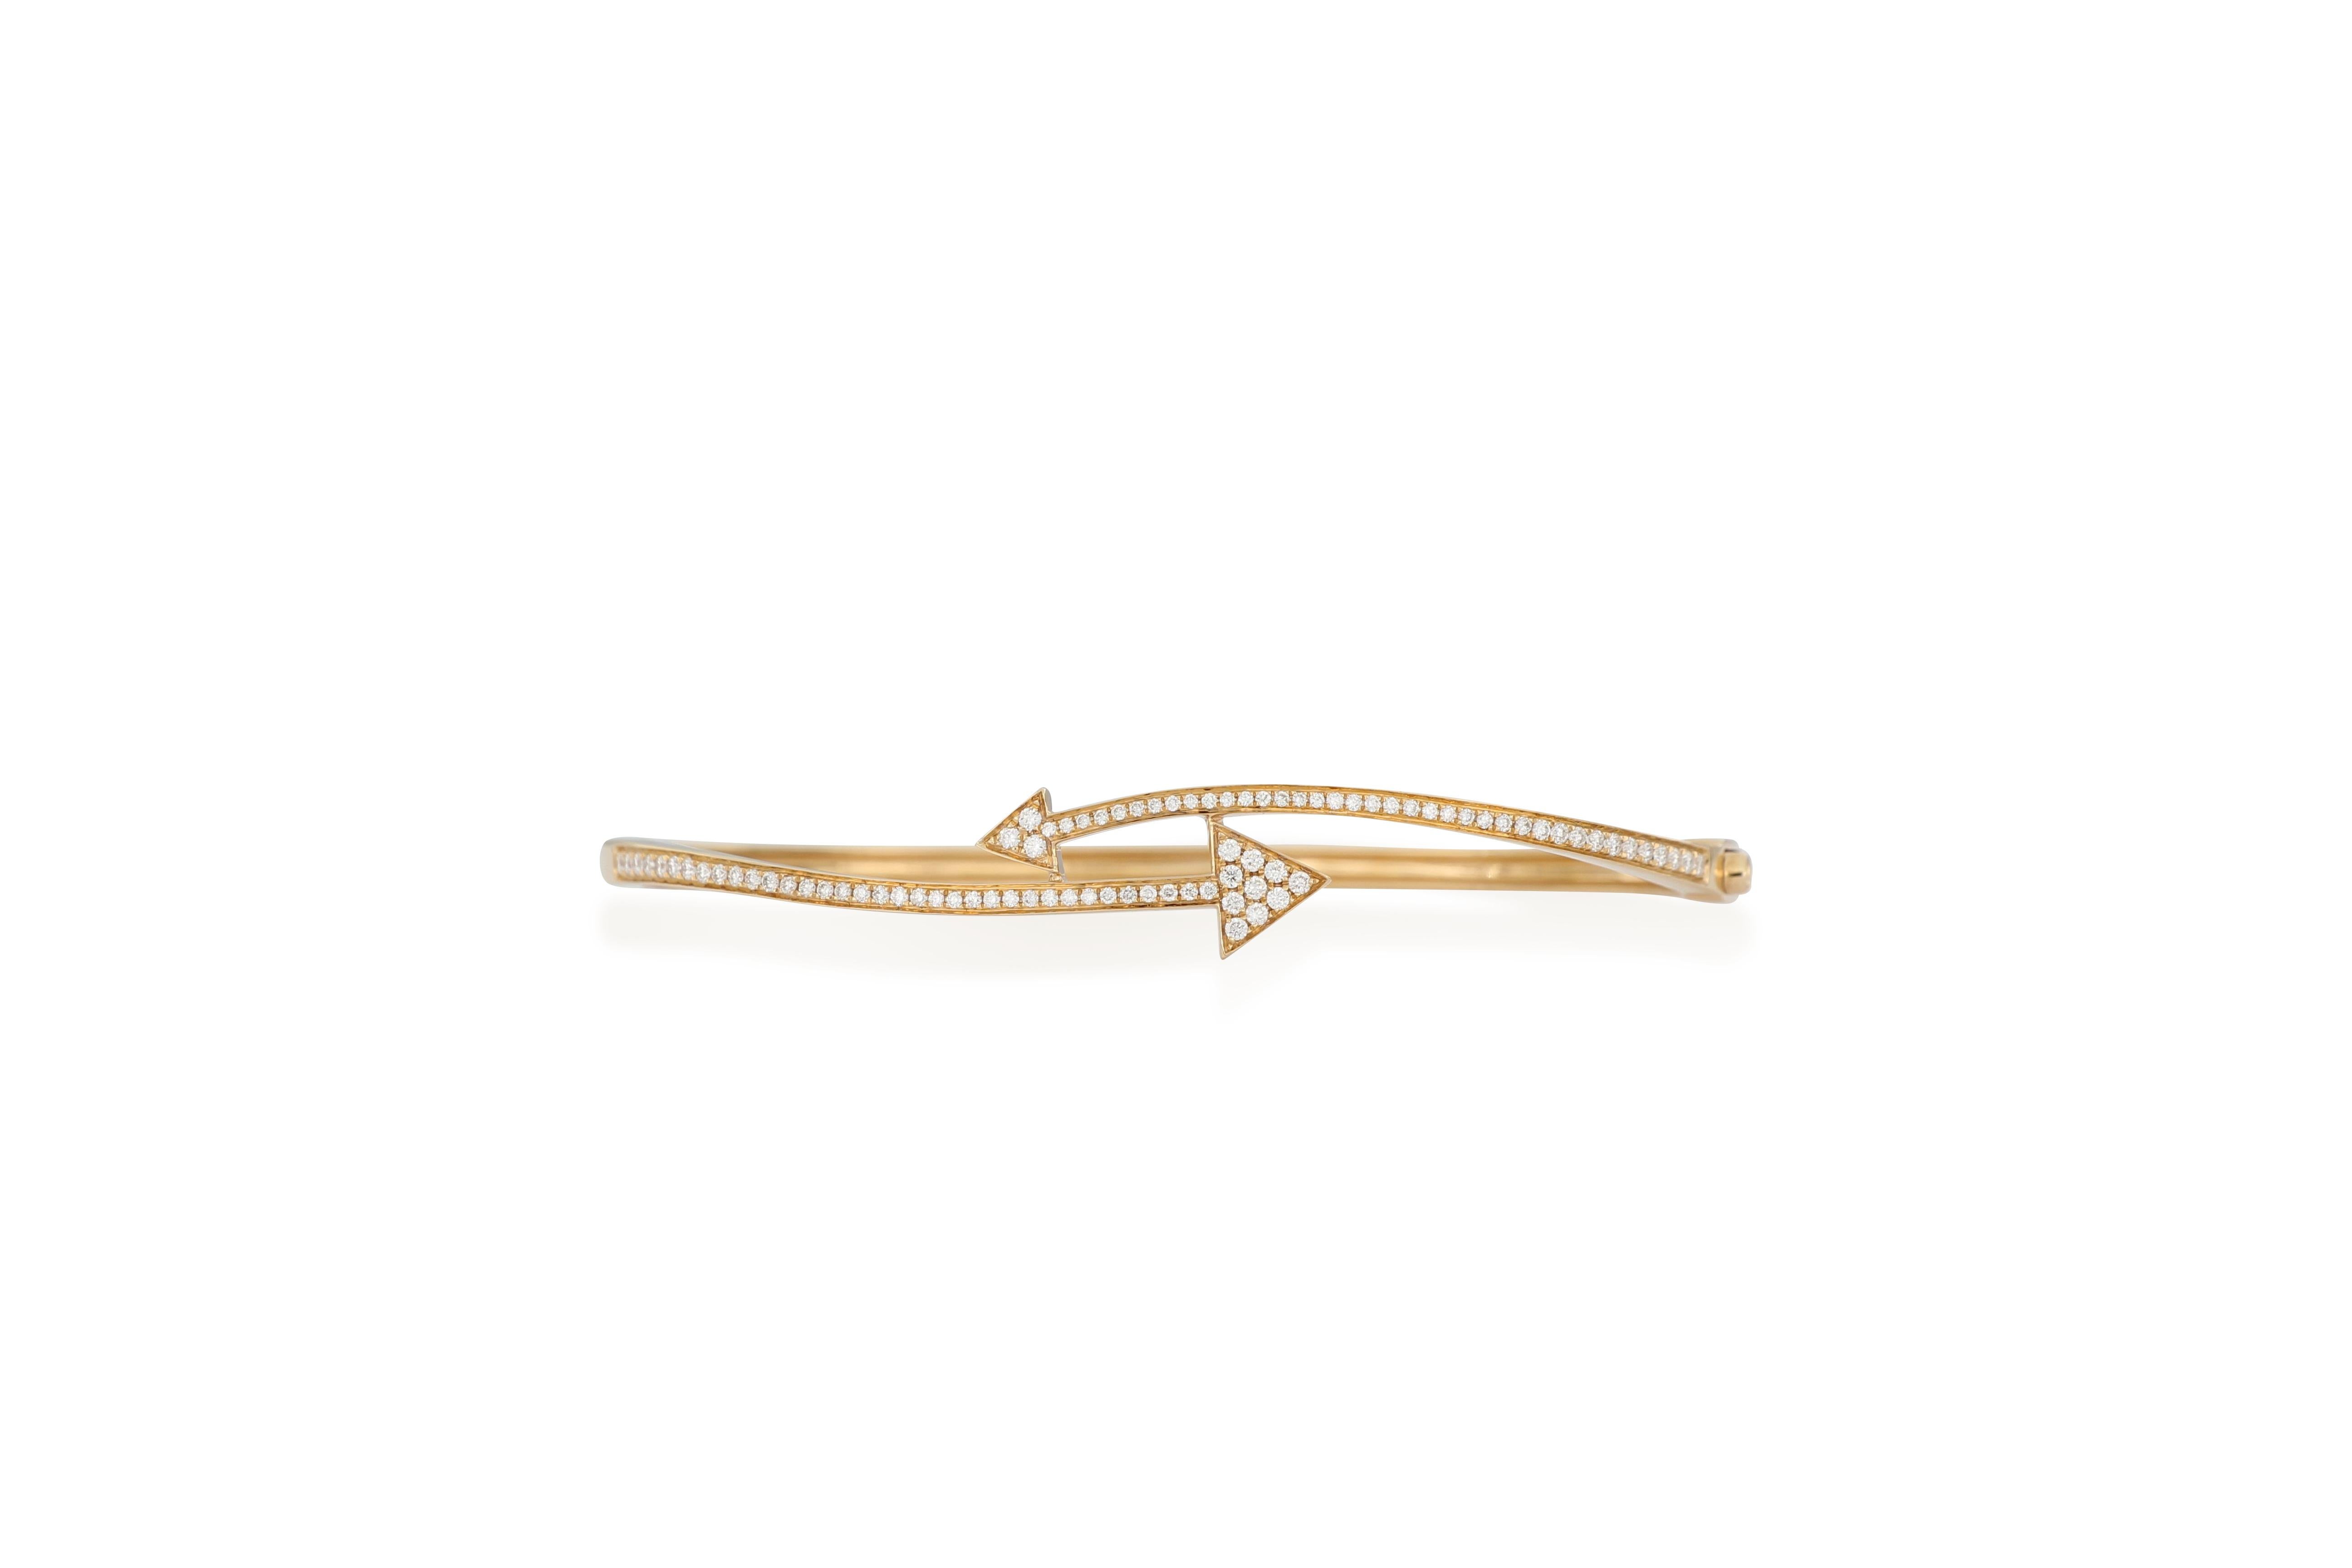 A glamourous diamond bangle in an arrow design, composed of clusters of brilliant-cut diamonds altogether weighting 0.374 carats, mounted in 18 karat rose gold. It is a very nice piece of jewelry for daily wear, stylish and trendy, and suitable for